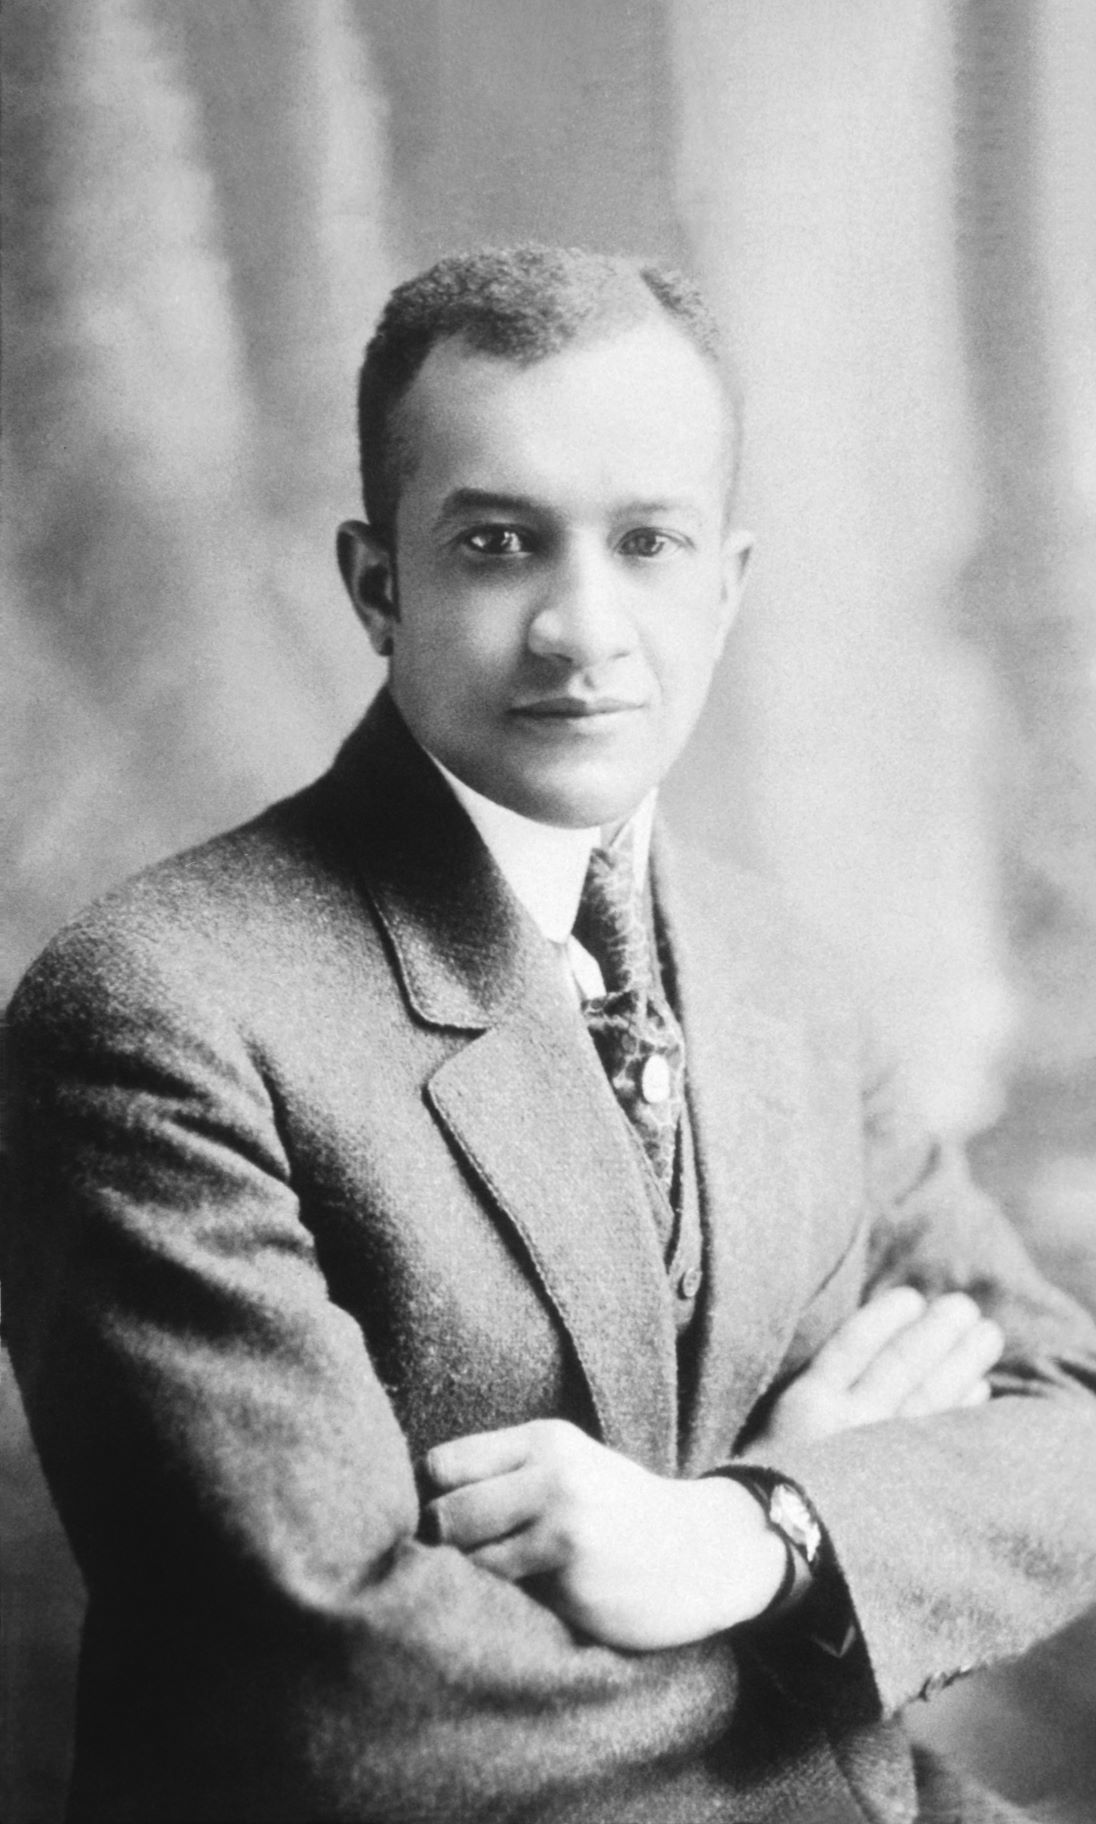 A black and white photograph of a young Black man posed with his arms crossed in a studio portrait. He is wearing a suit and tie.